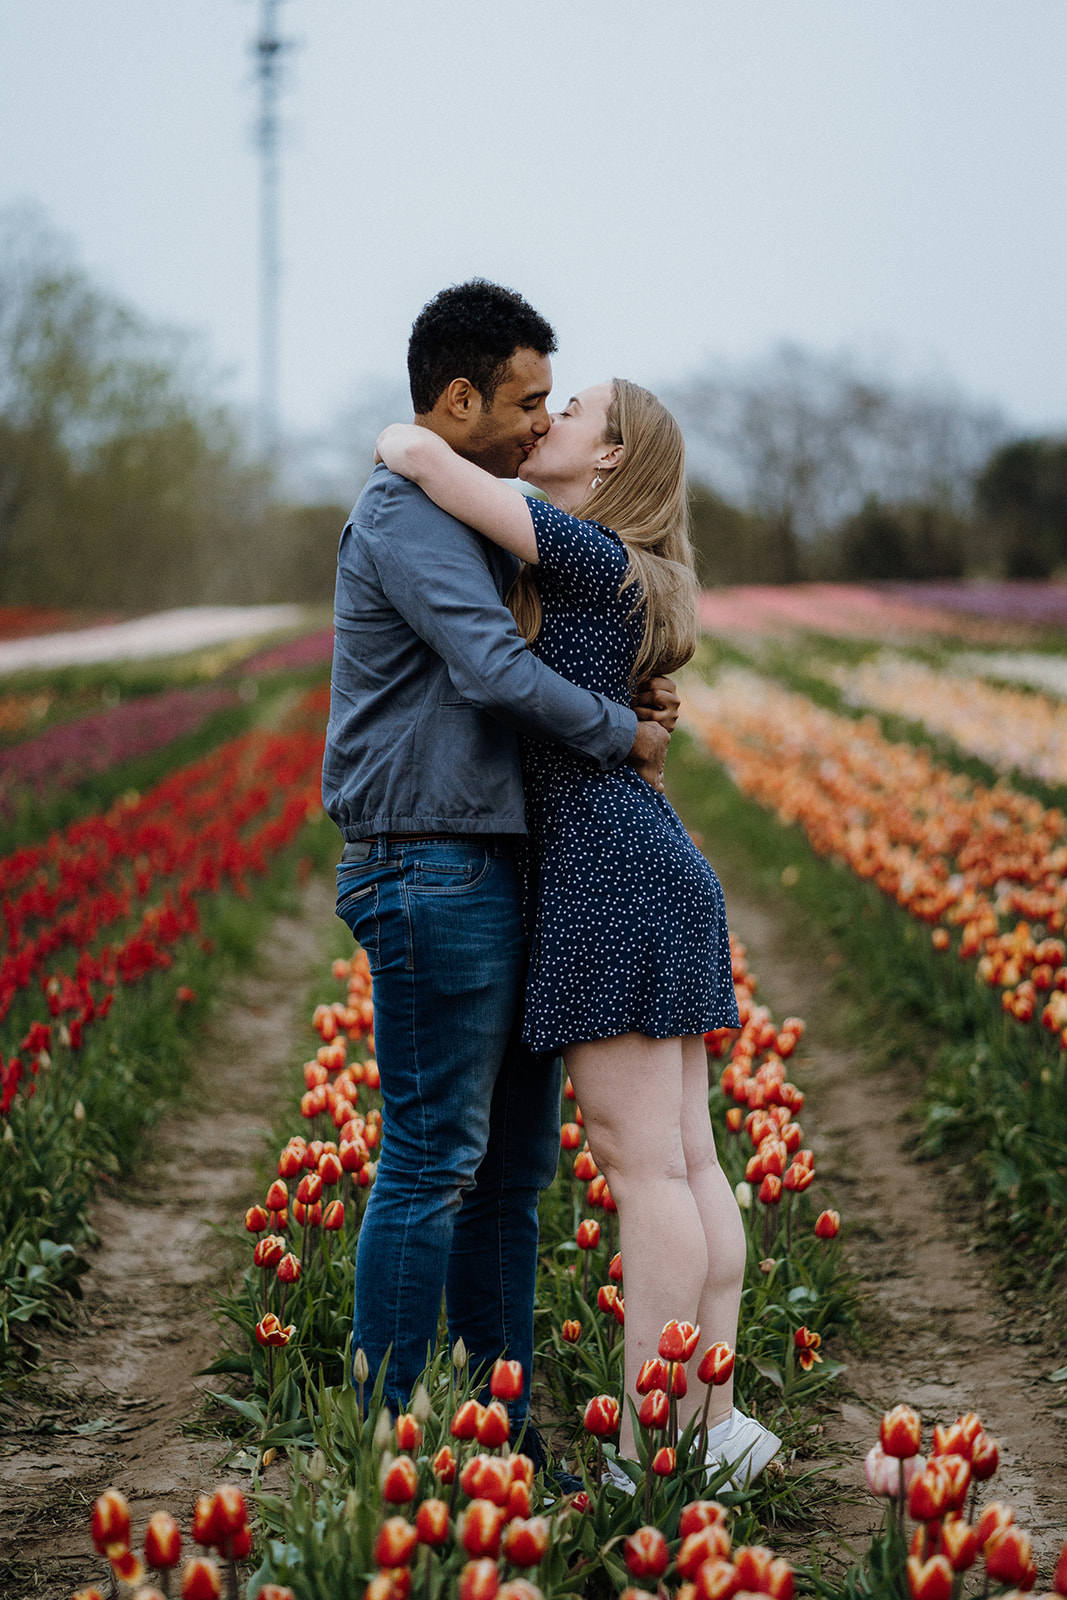 Newly engaged couple kissing while hugging each other in tulips.